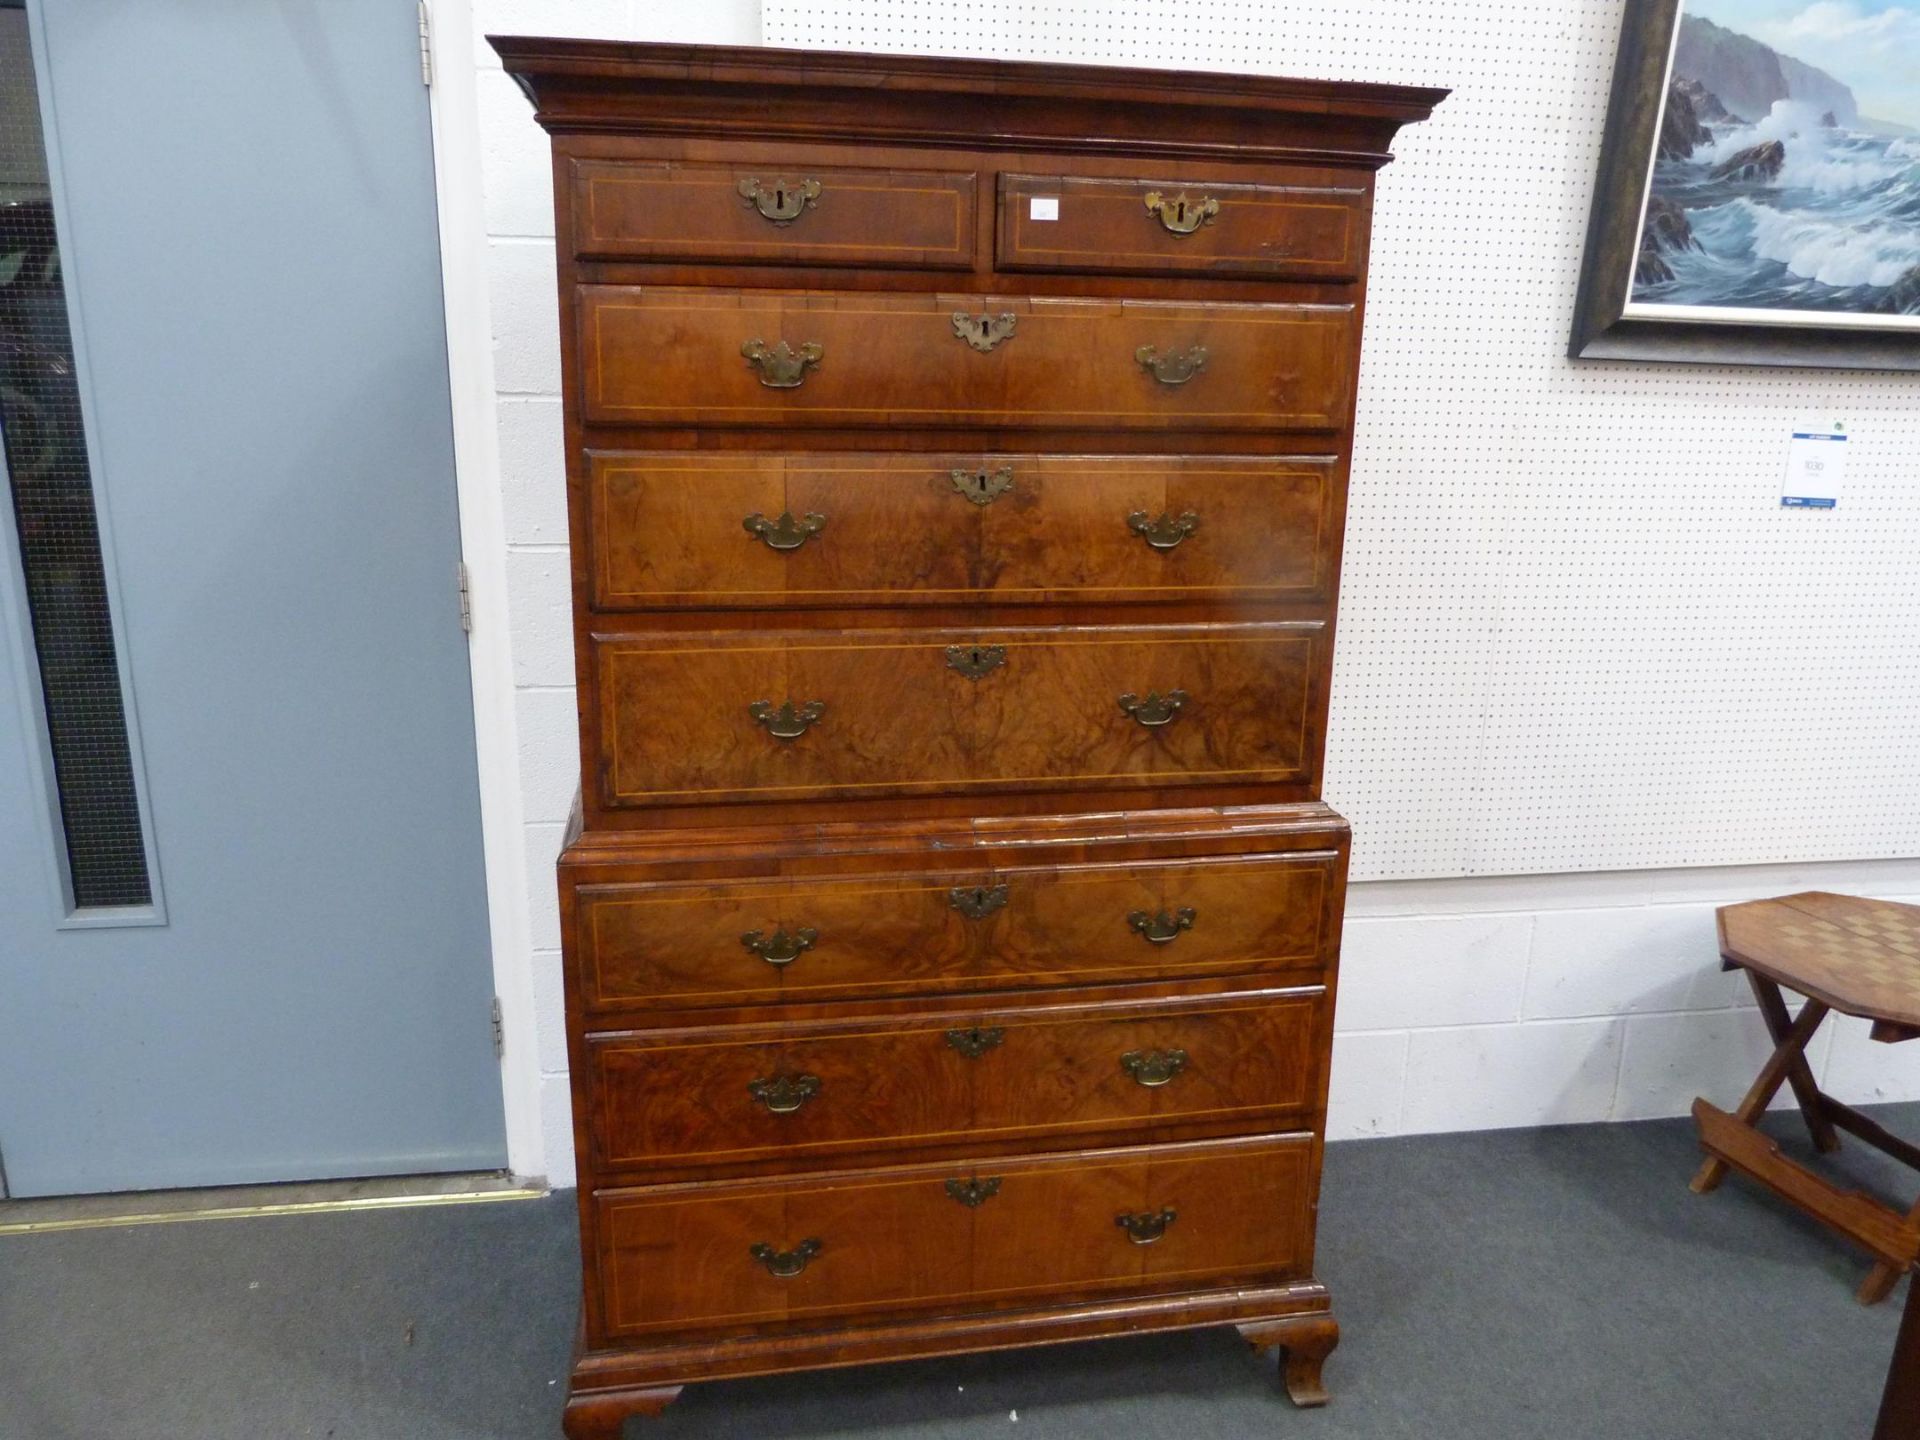 An 18th Century Walnut Tallboy of Small size with Inlaid Stringing to the Drawer Fronts; Two Short